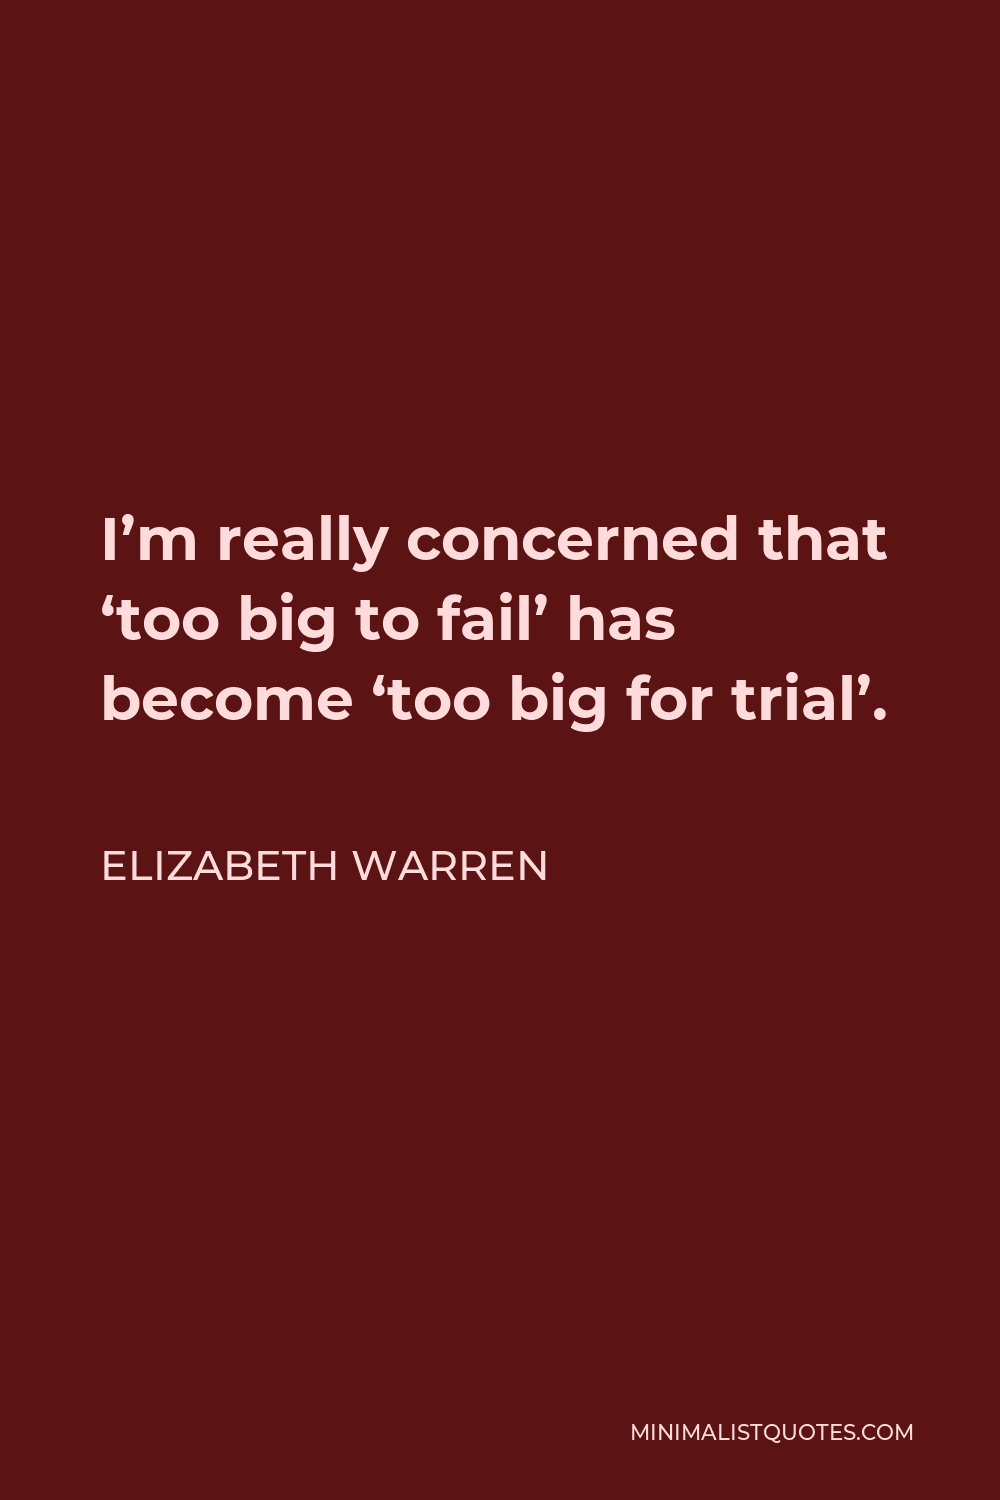 Elizabeth Warren Quote - I’m really concerned that ‘too big to fail’ has become ‘too big for trial’.